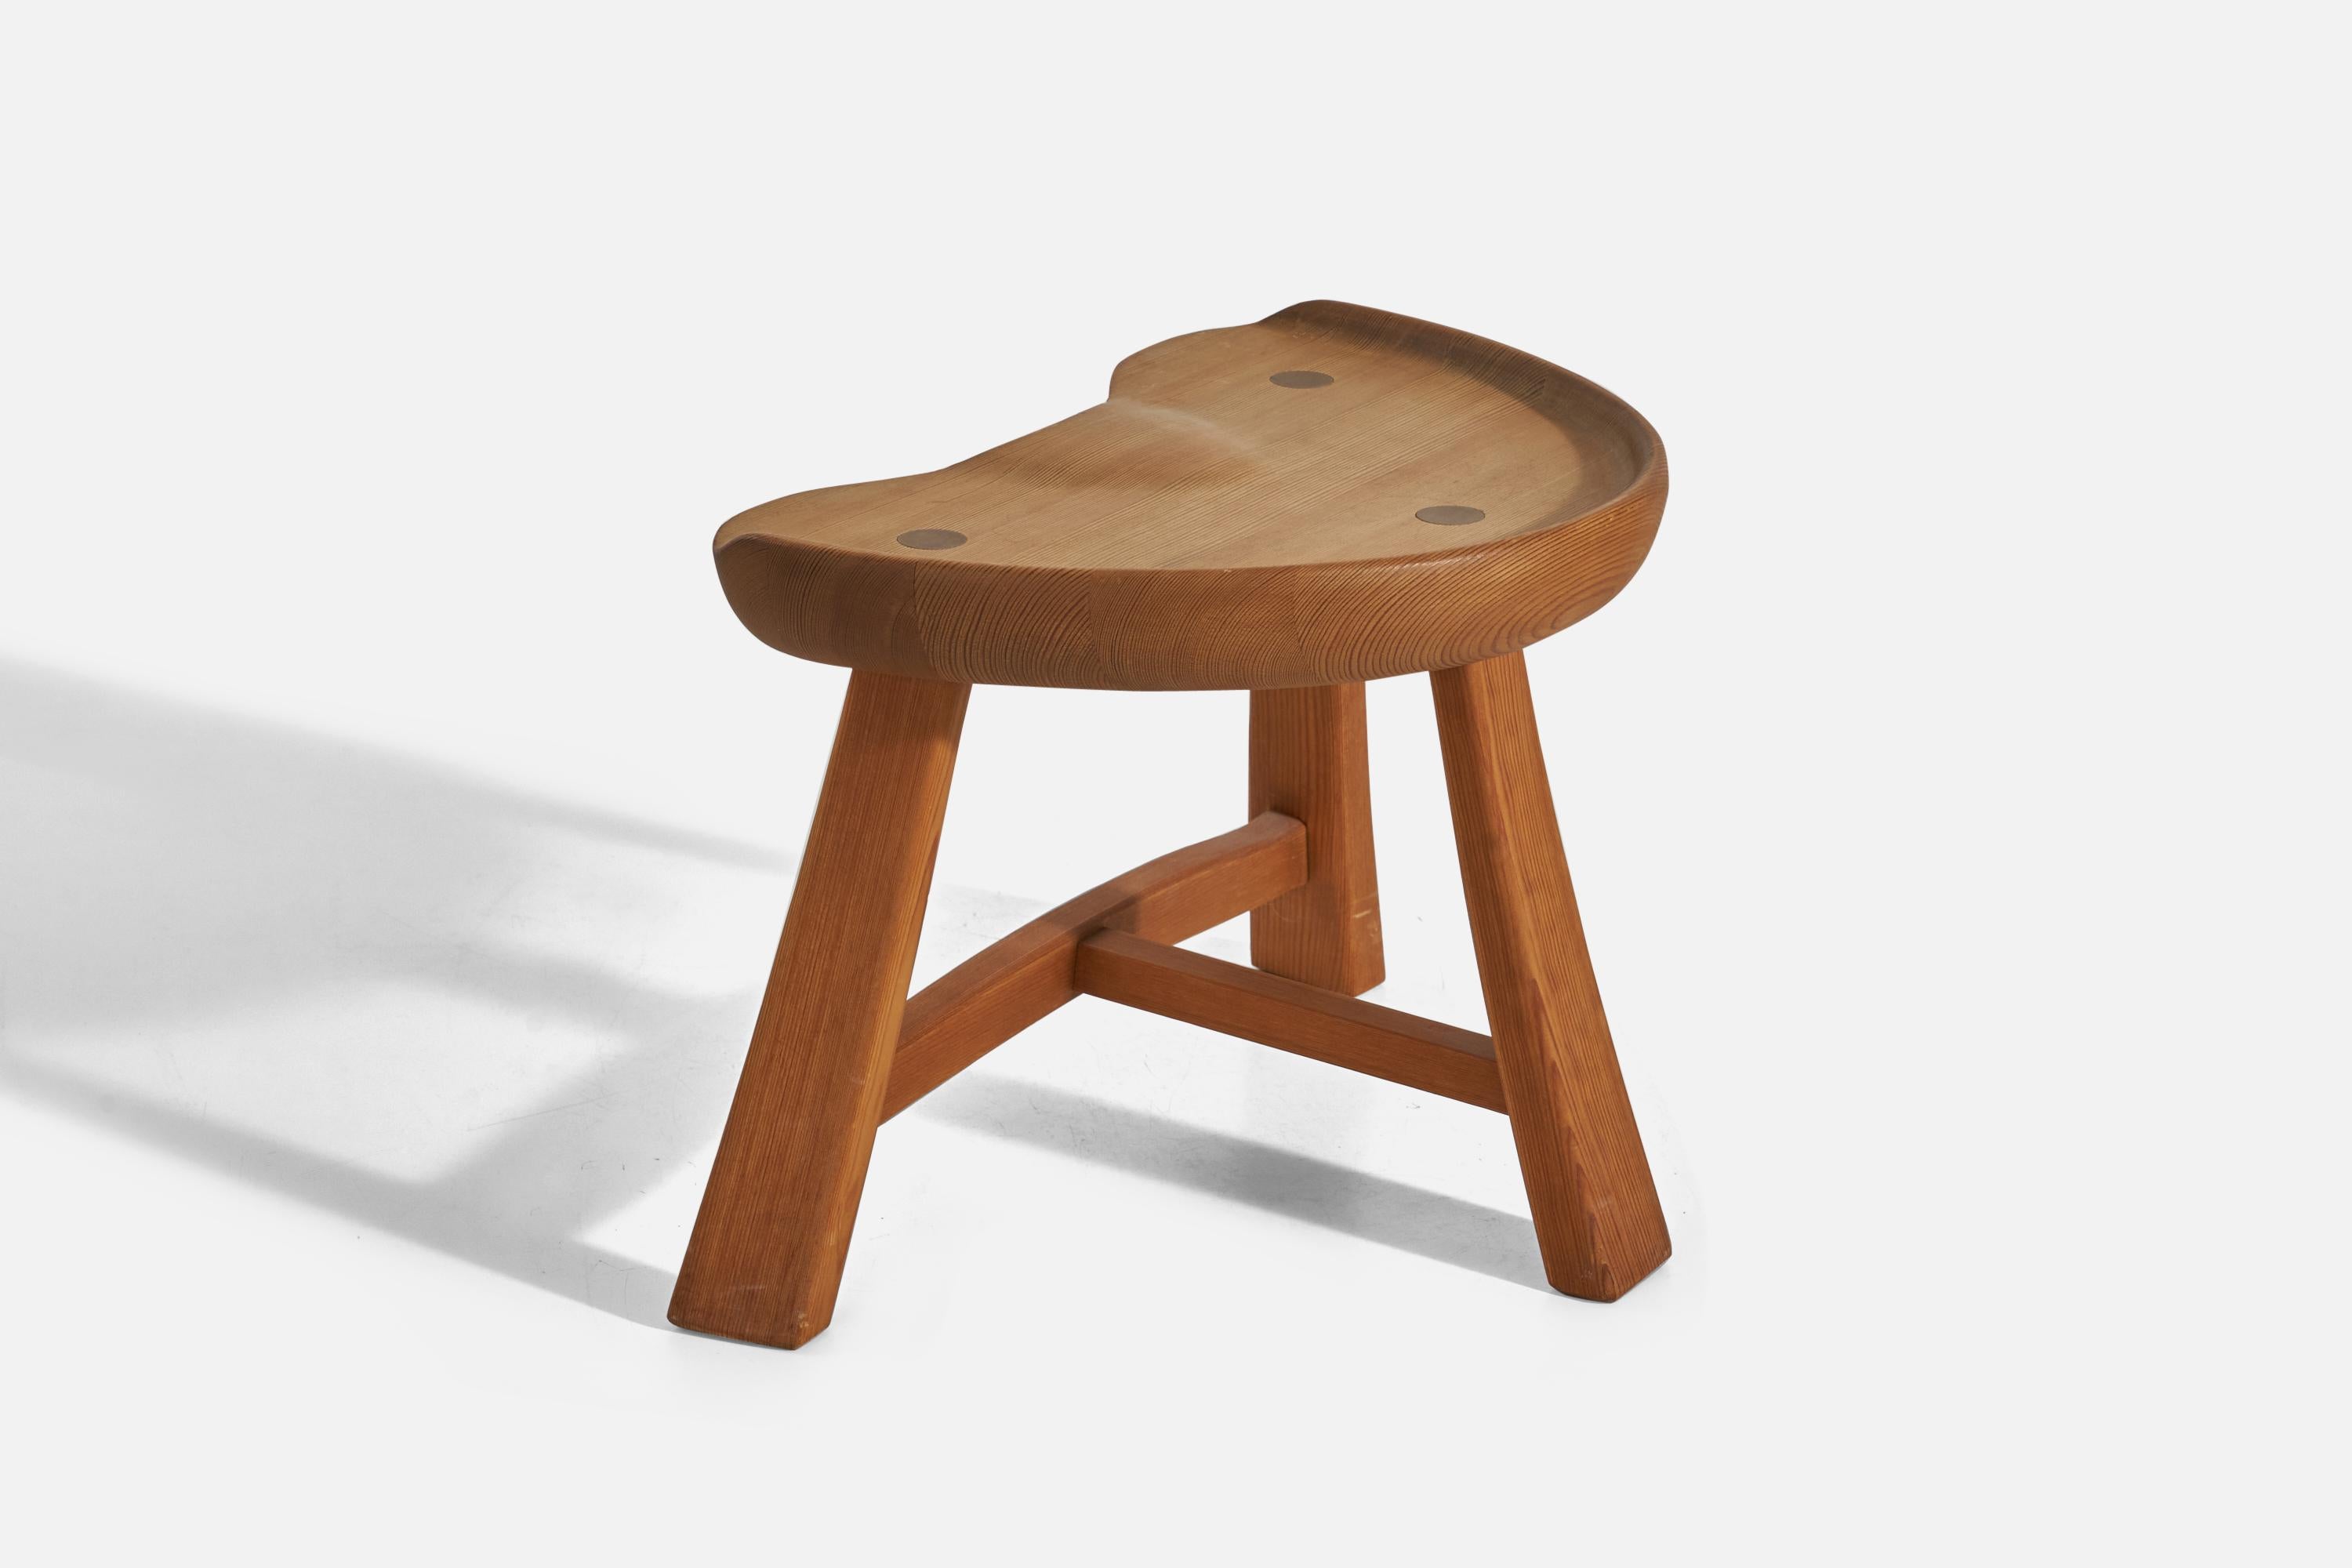 A sculpted pine stool designed and produced by Krogenæs Møbler, Norway, 1950s.